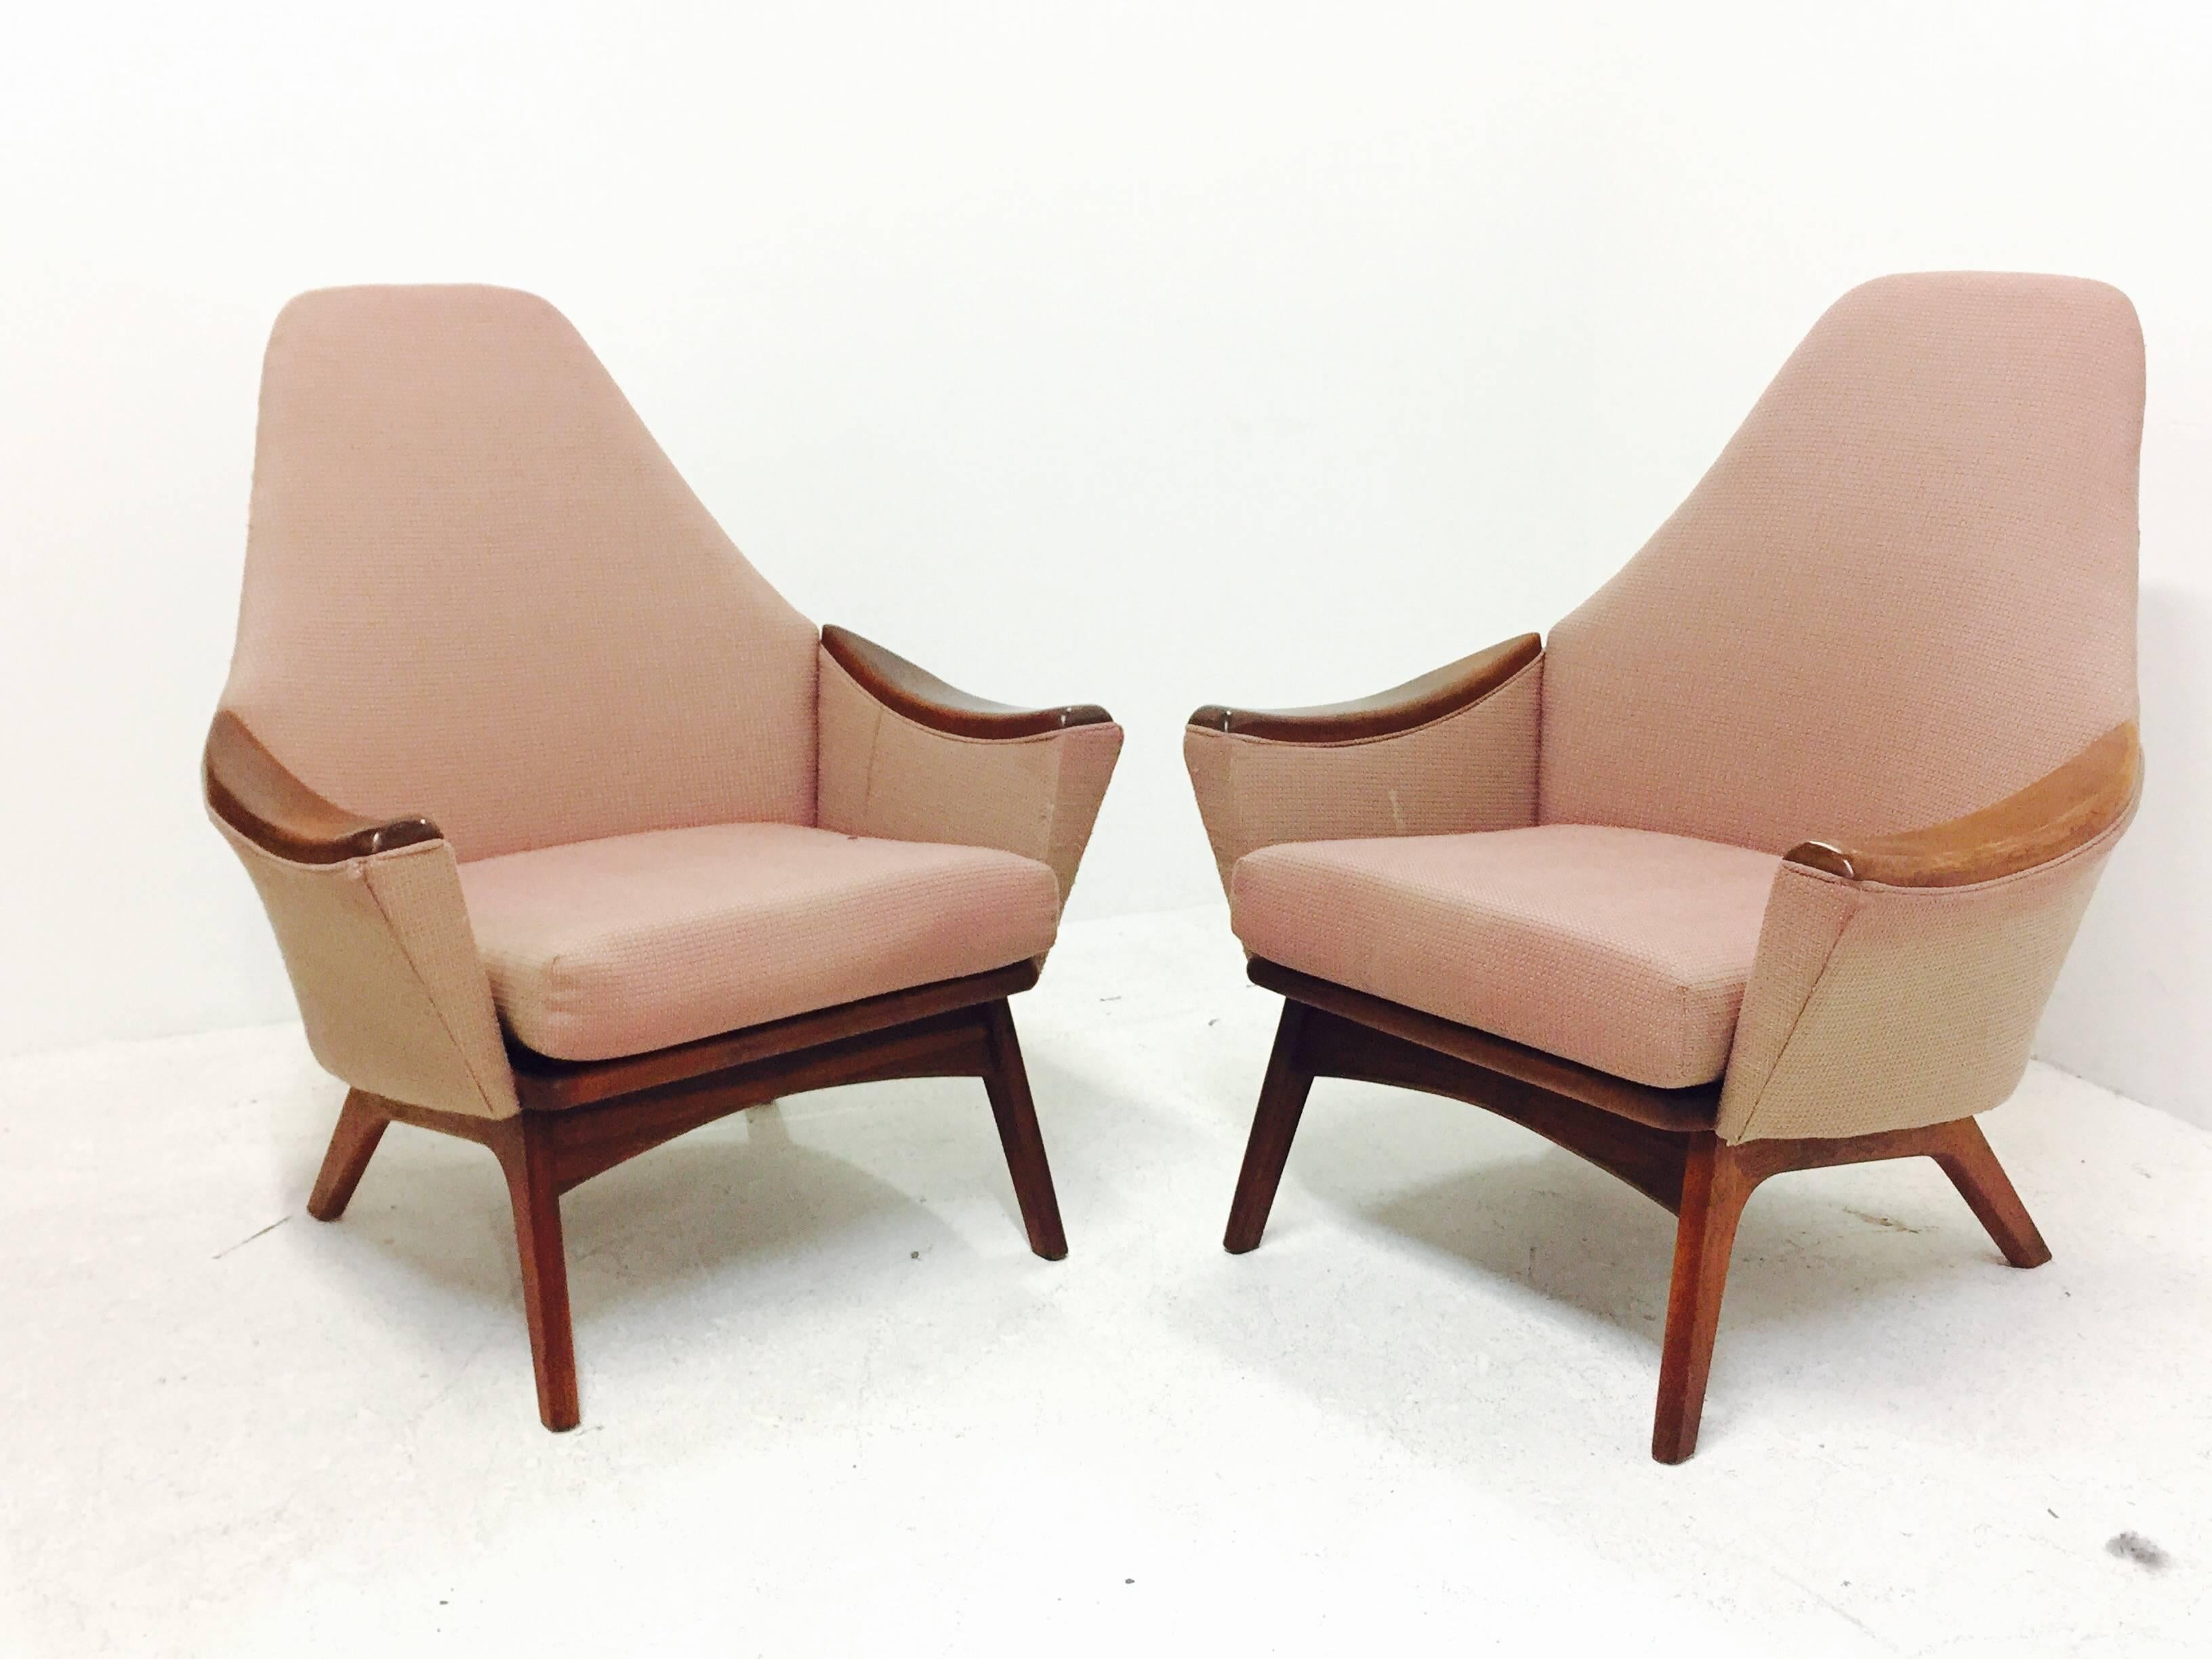 Pair of high back lounge chairs by Adrian Pearsall for Craft Associates. Upholstery and refinishing is recommend, circa 1960s.

Dimensions: 30